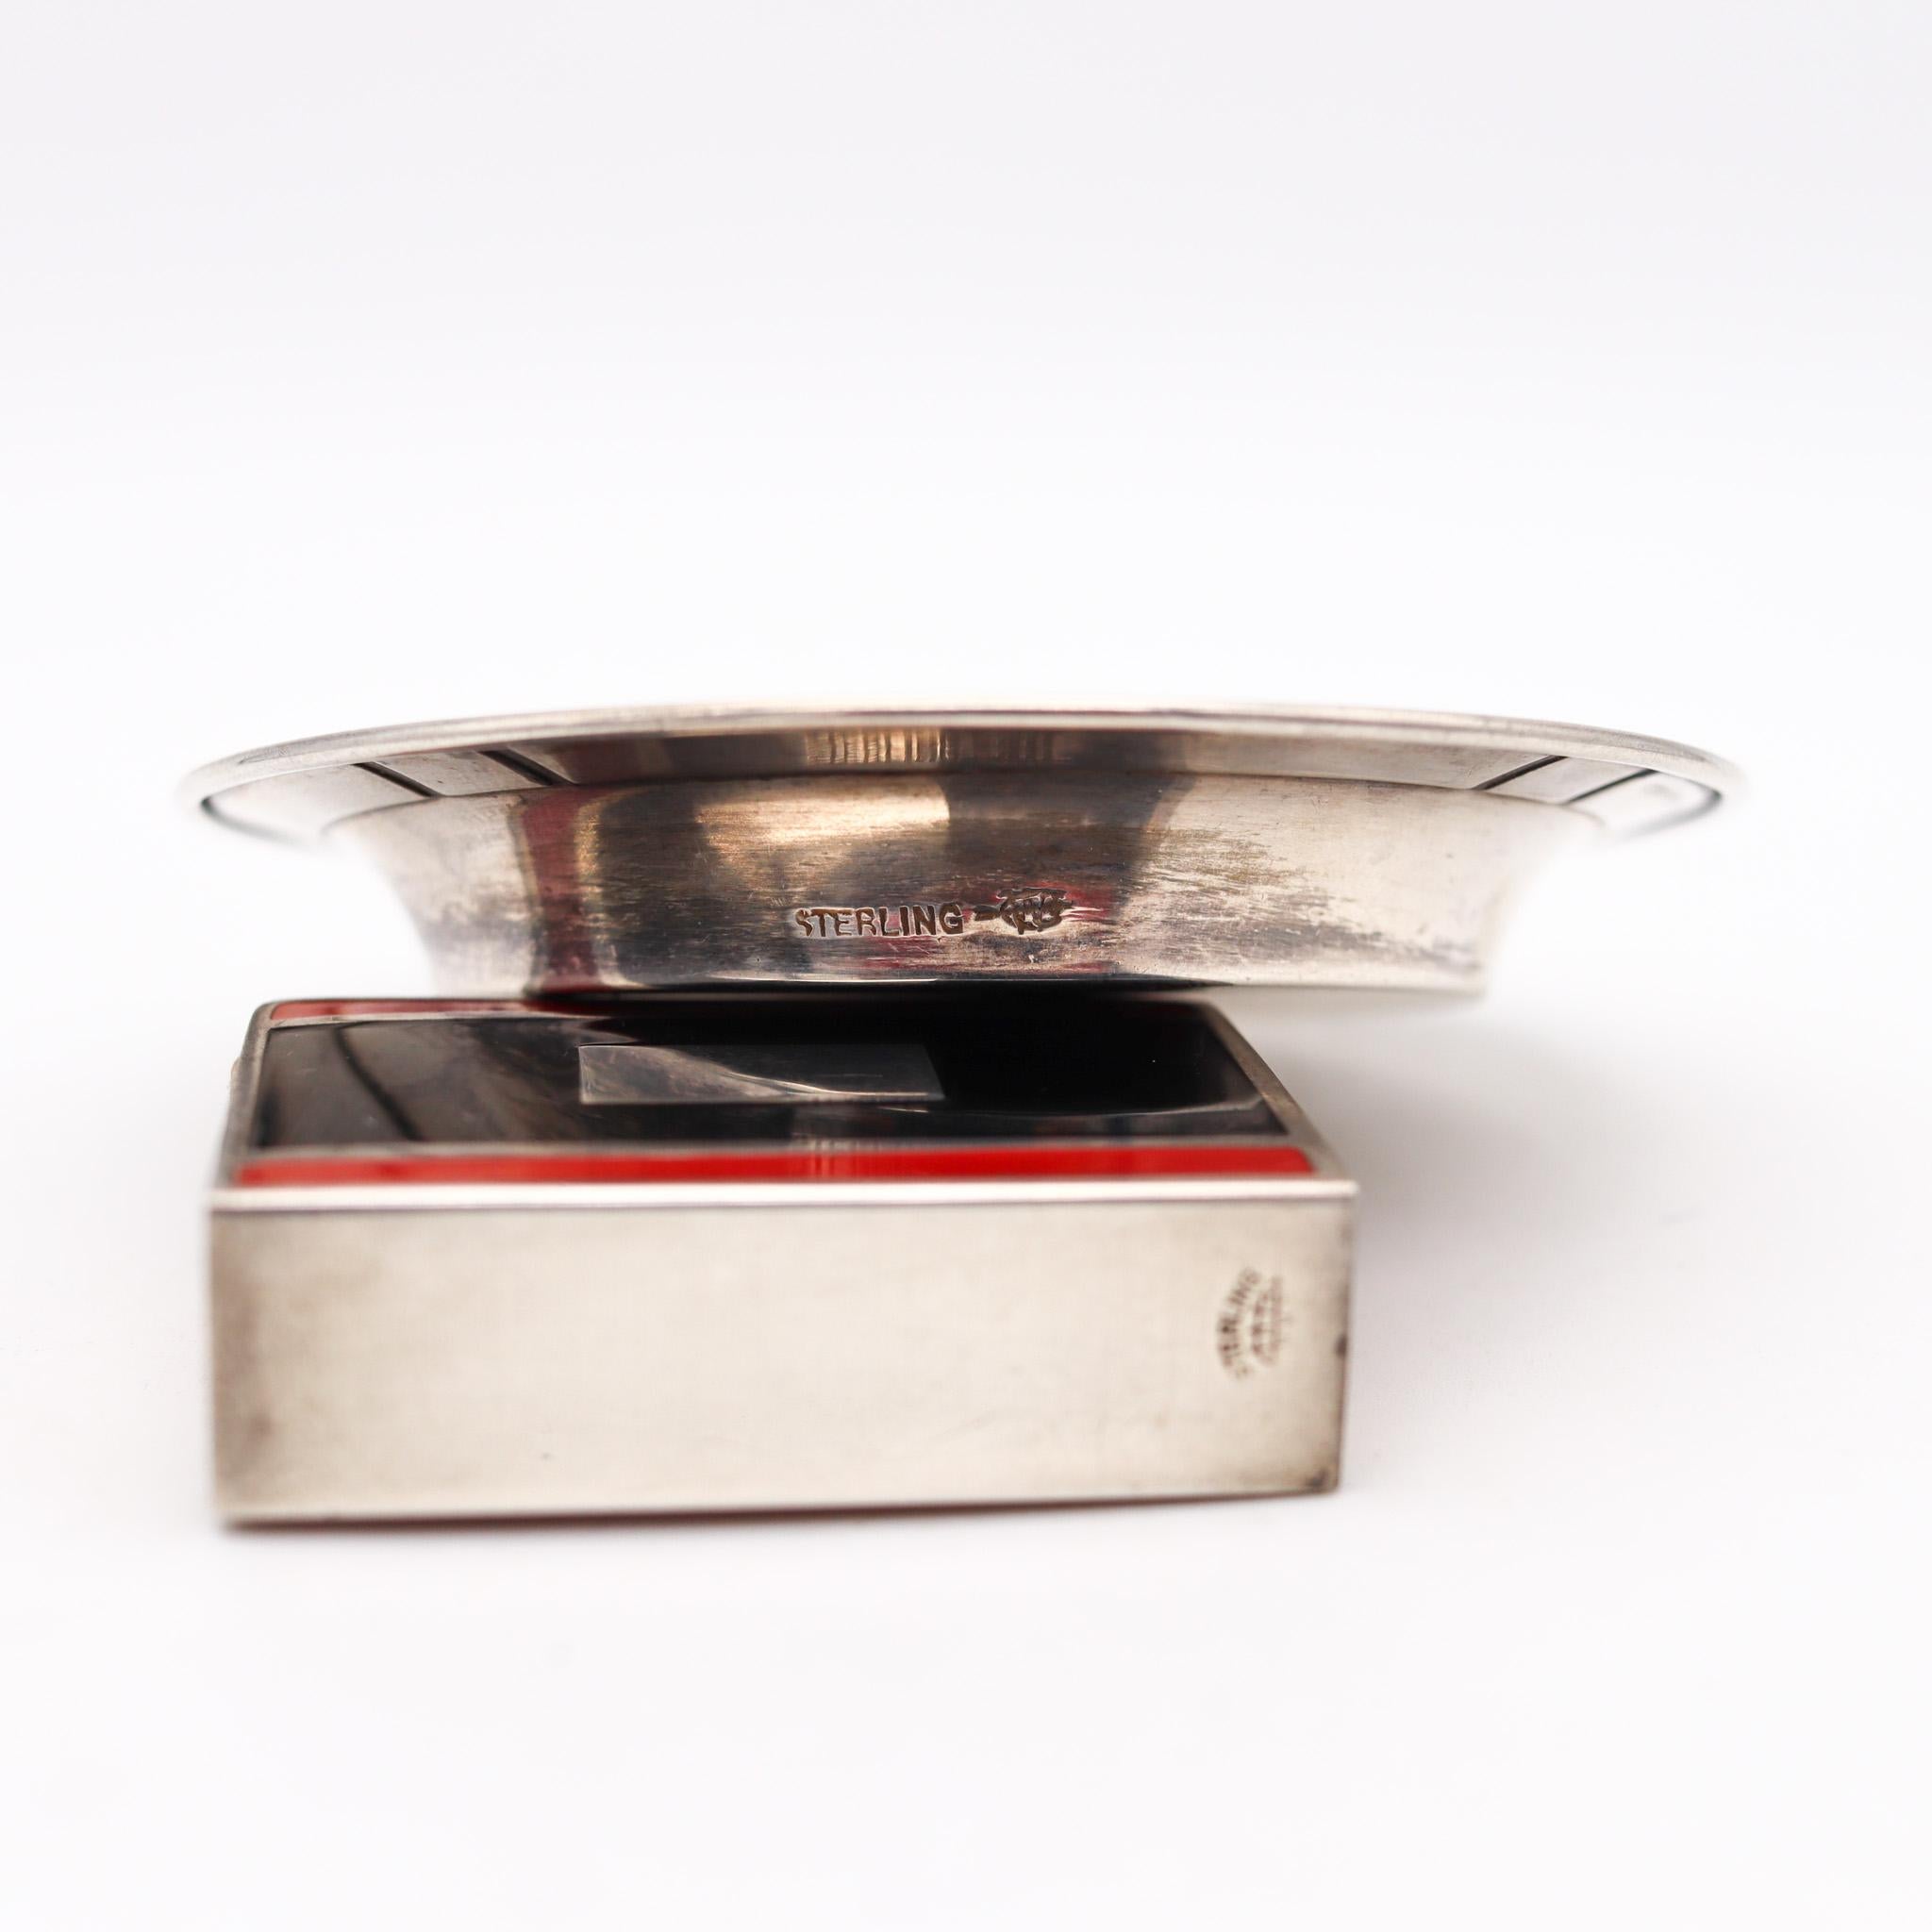 Webster & Sons 1925 Art Deco Red & Black Enameled Smoking Set in Sterling Silver In Excellent Condition For Sale In Miami, FL